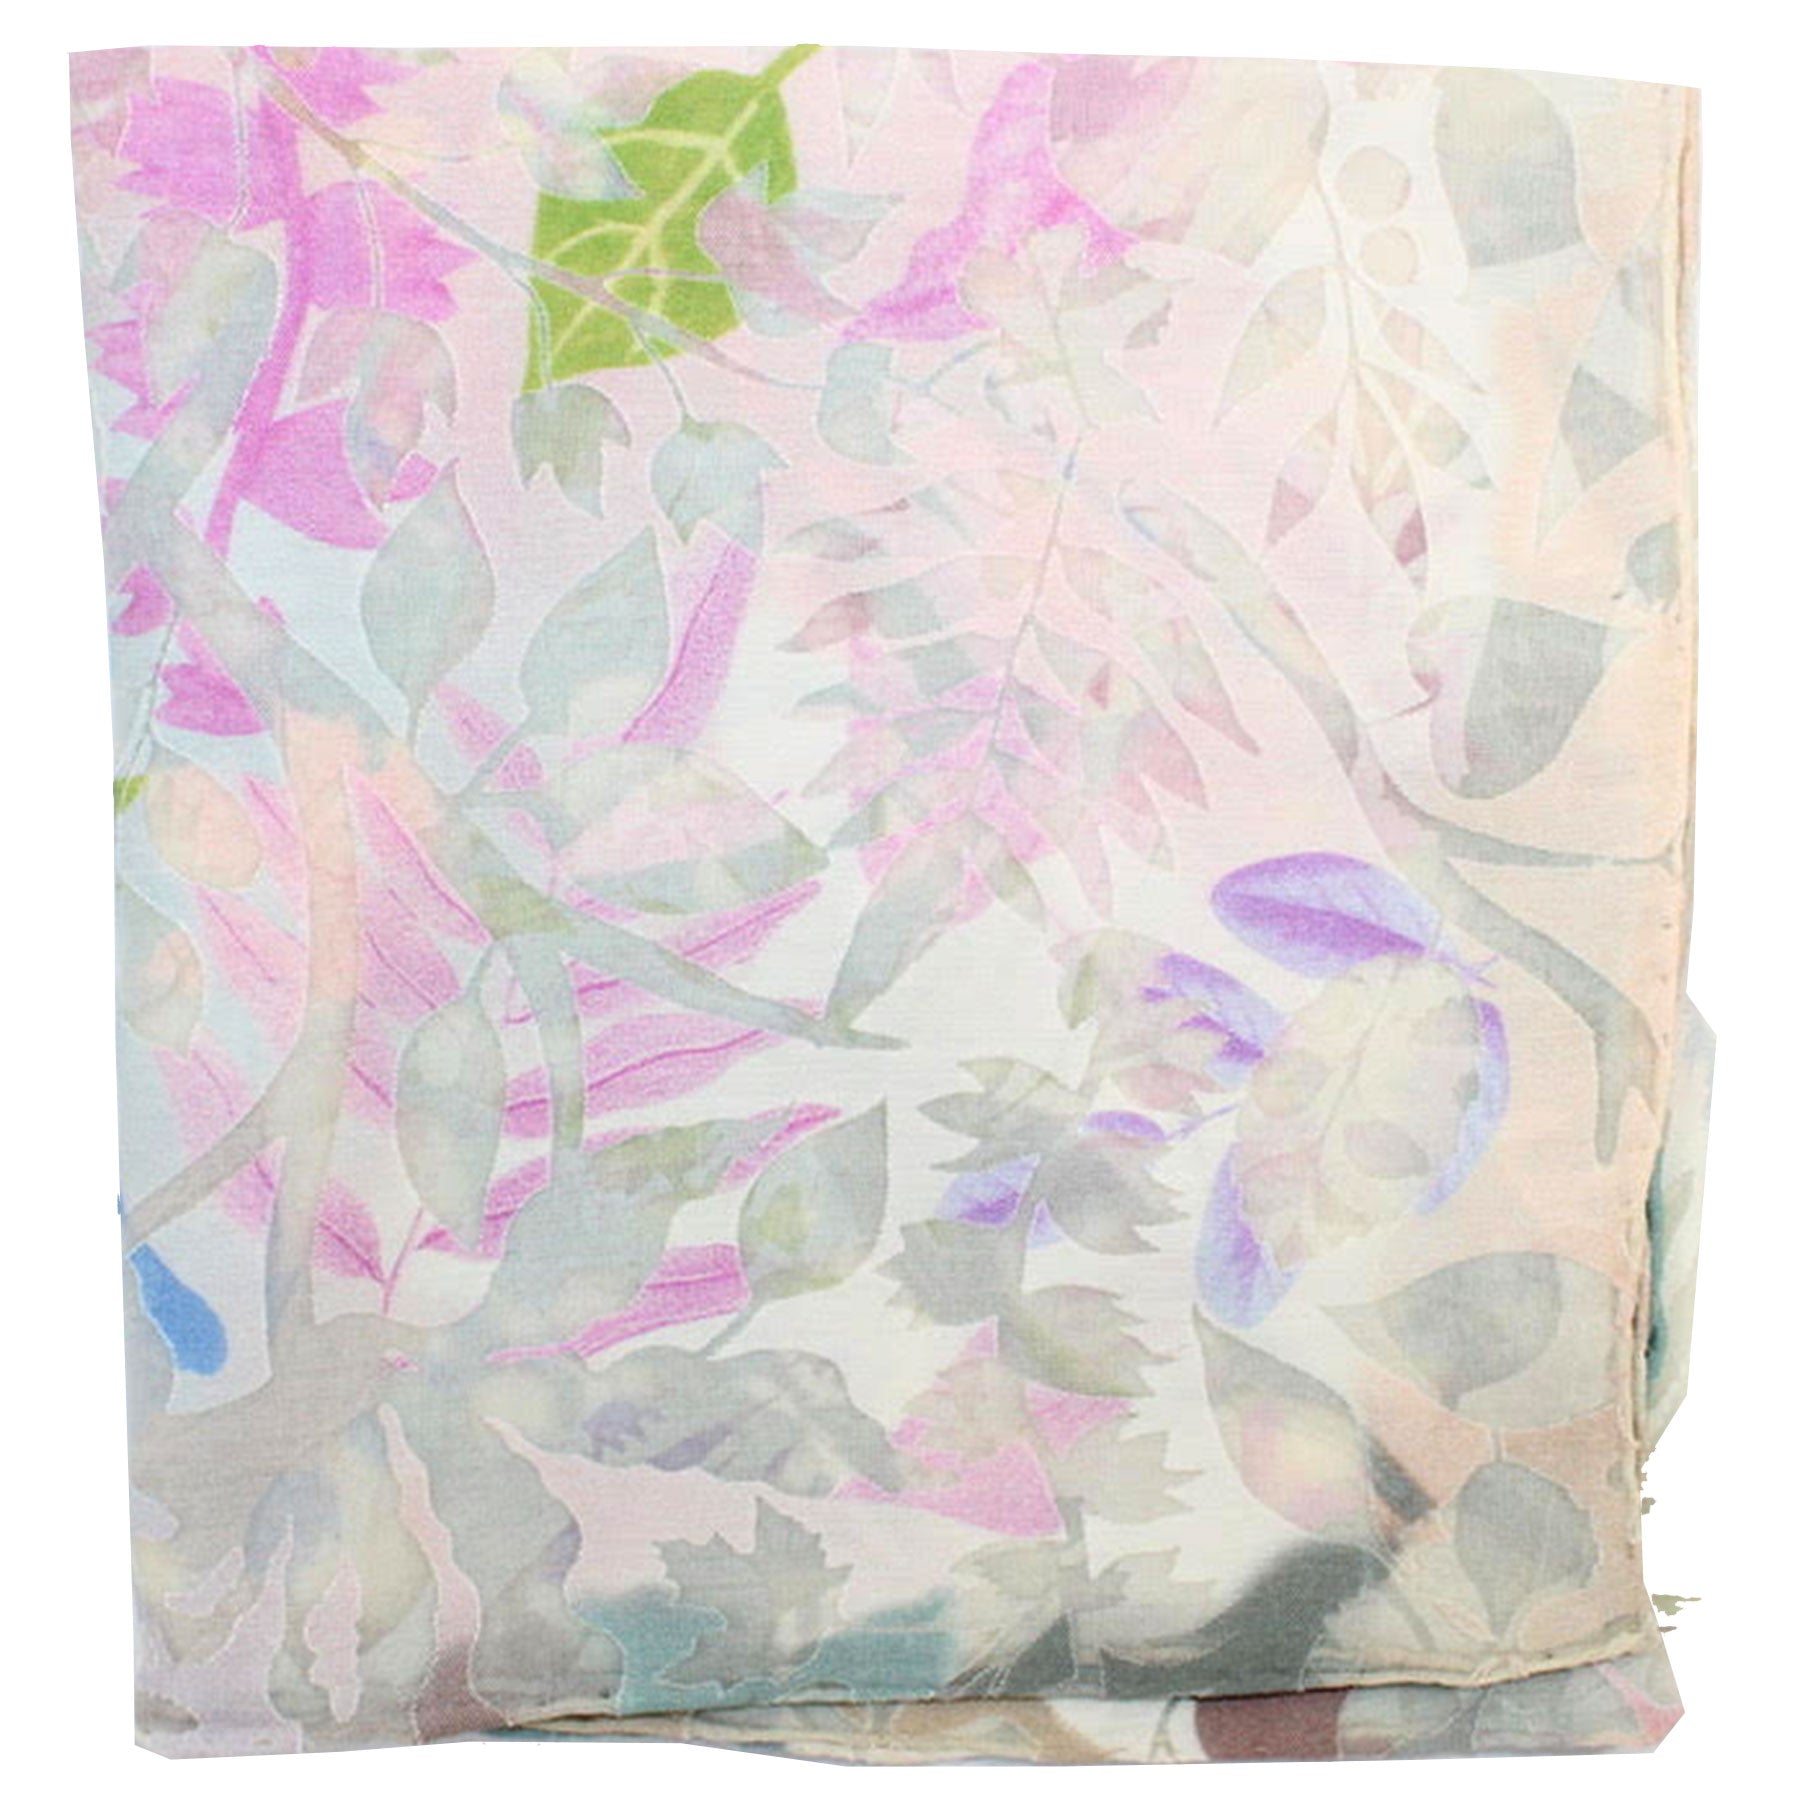 Christian Lacroix Scarf 20 Ans Design Cream Pink Turquoise Floral - Large Twill Silk Square Scarf